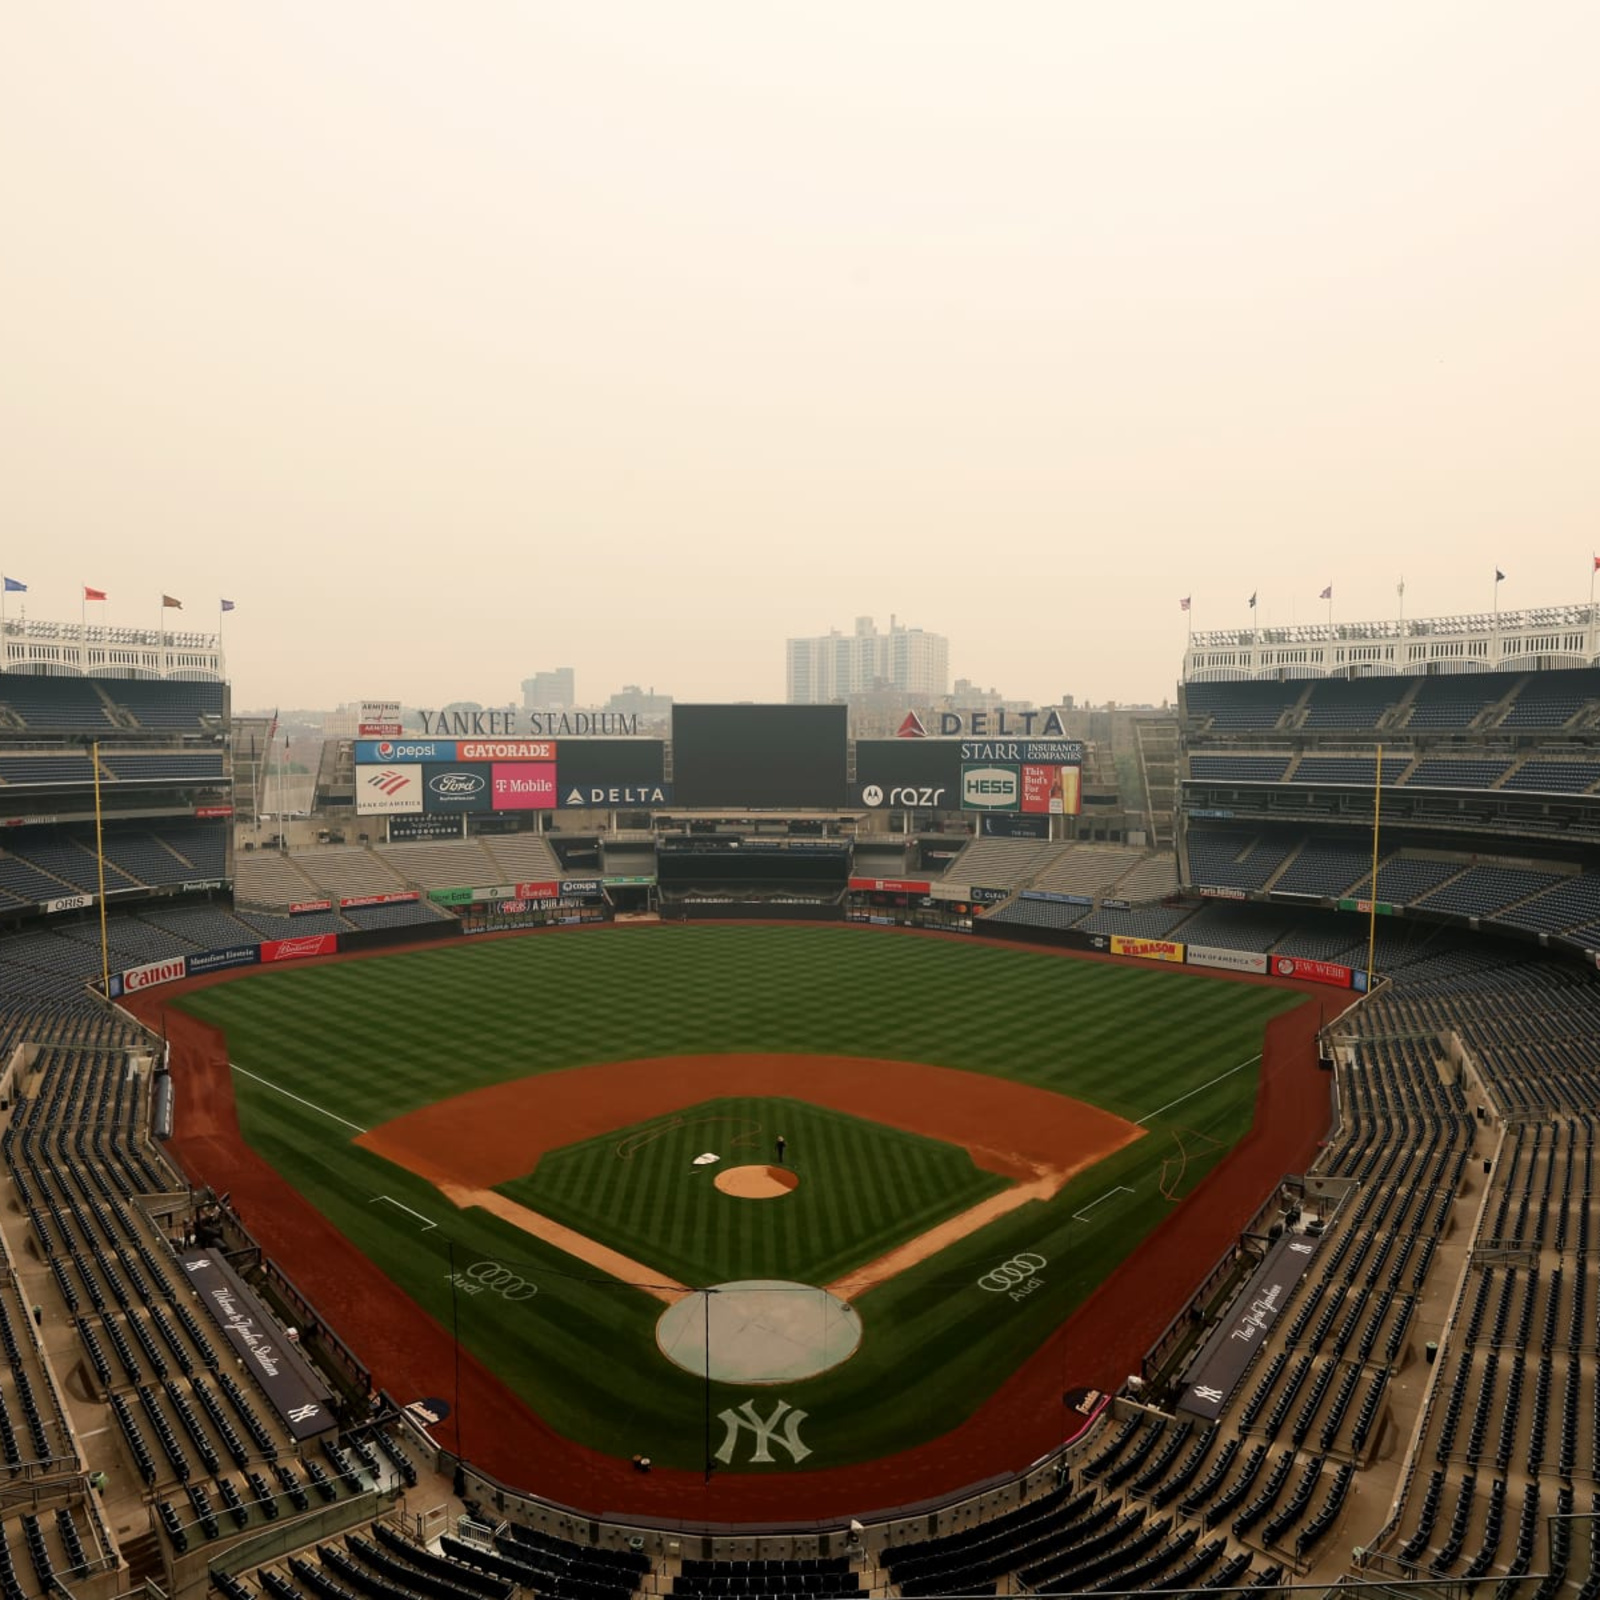 US: Haze From Canadian Wildfires Creates Eerie Scene At Yankee Stadium 2 -  Buy, Sell or Upload Video Content with Newsflare